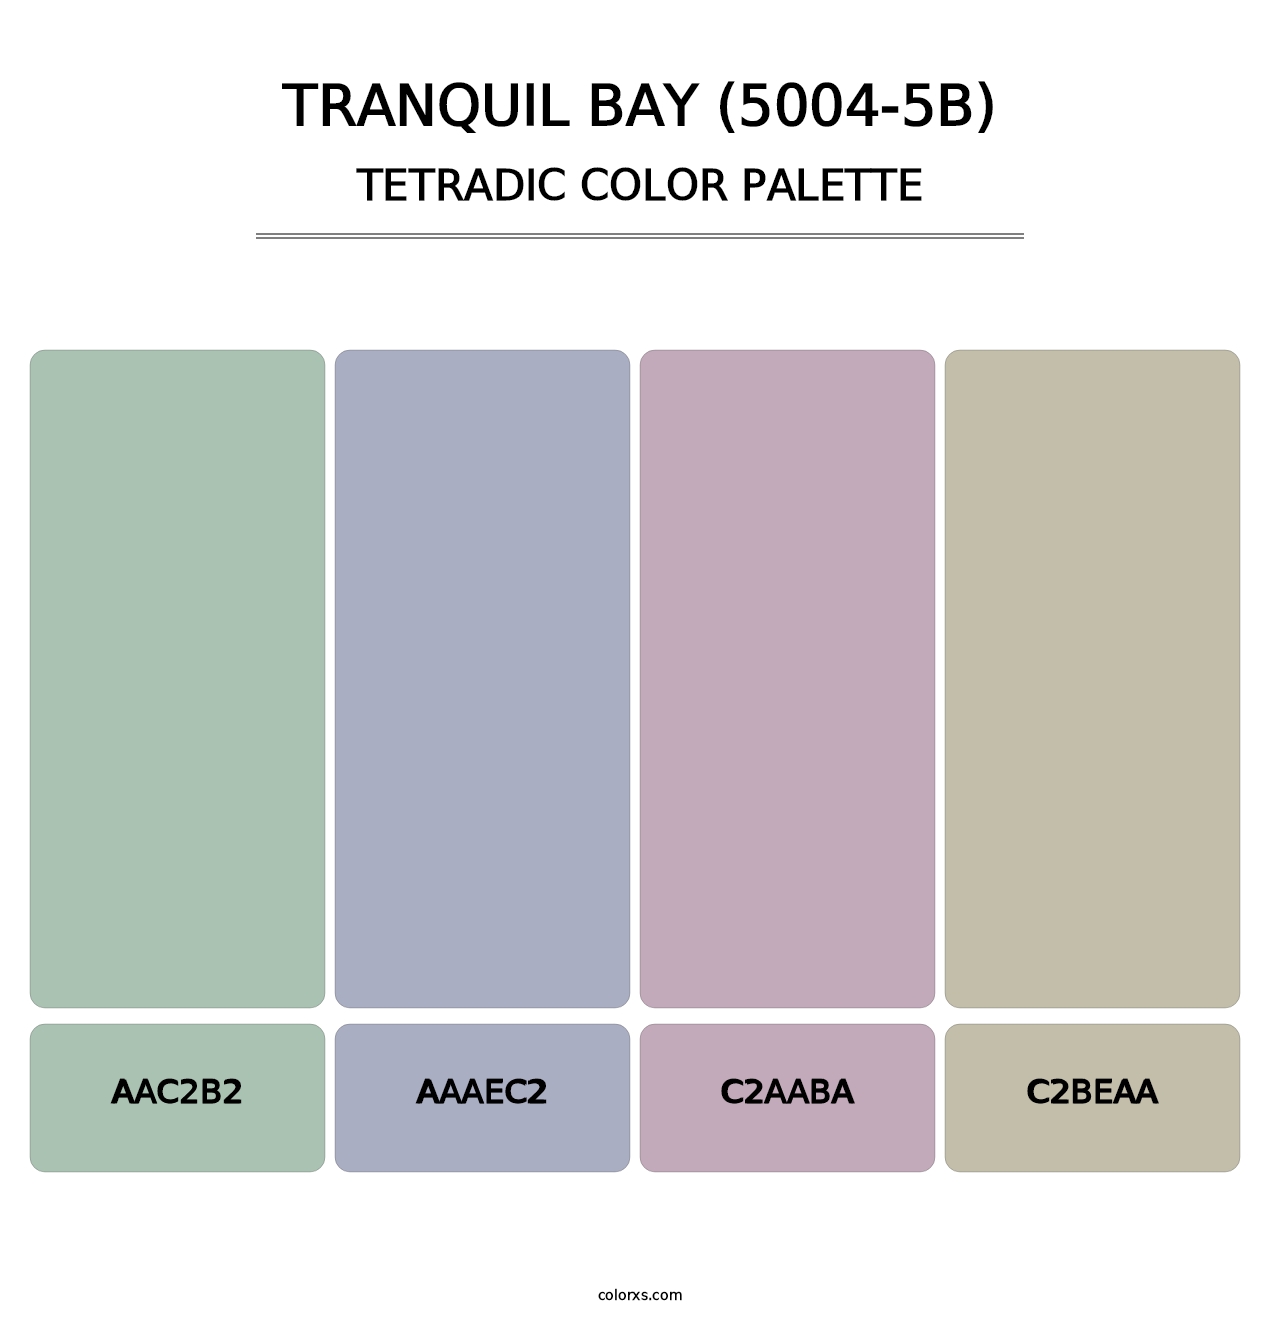 Tranquil Bay (5004-5B) - Tetradic Color Palette